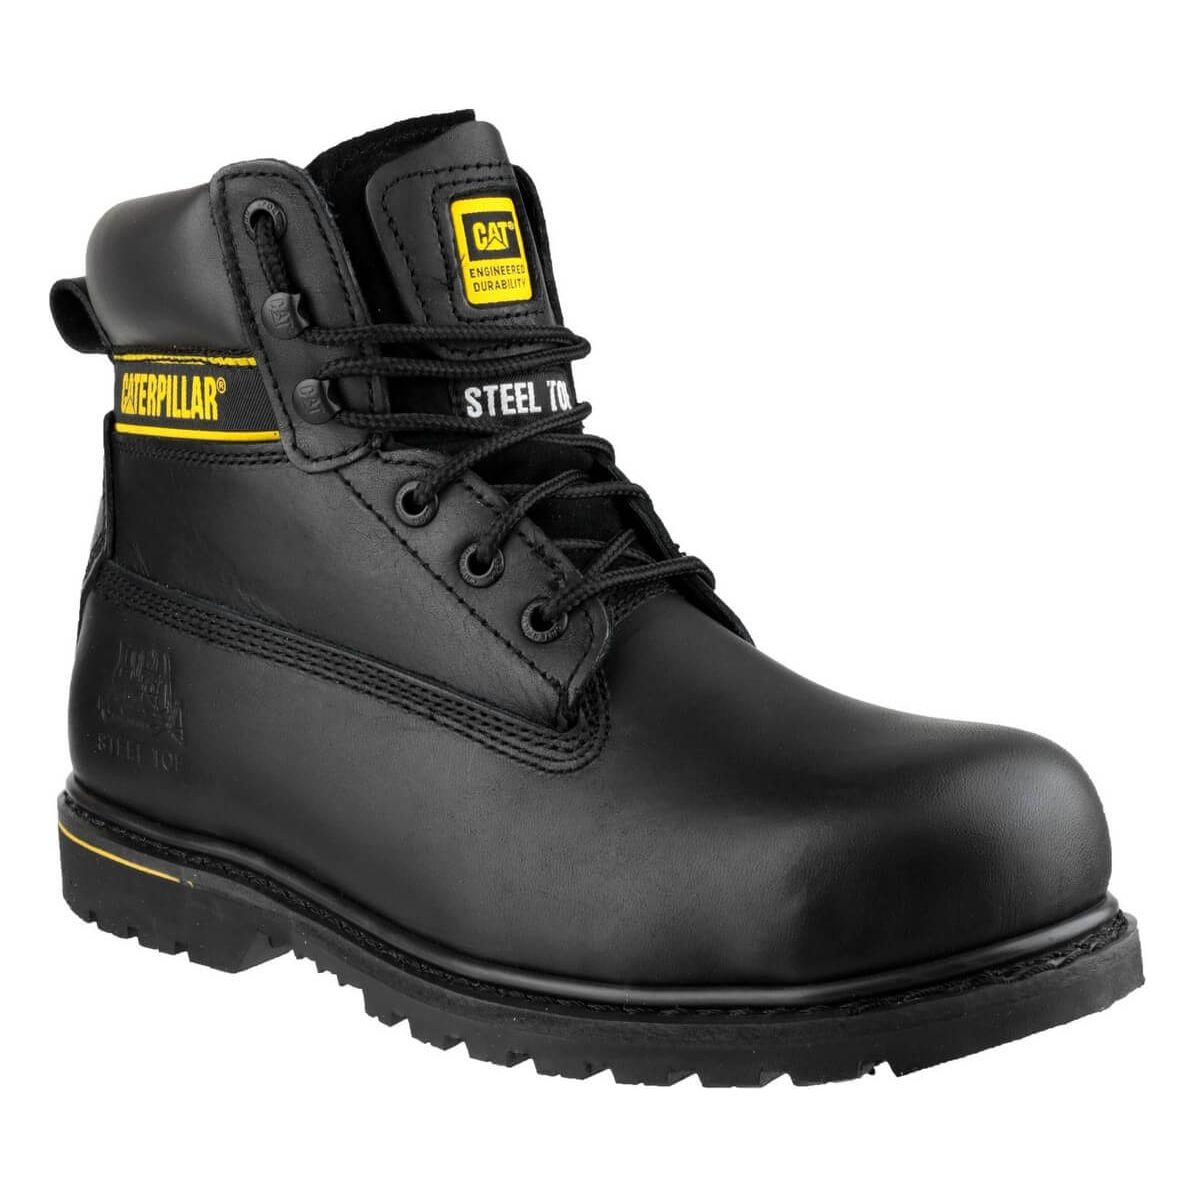 Caterpillar Holton Safety Boots Mens